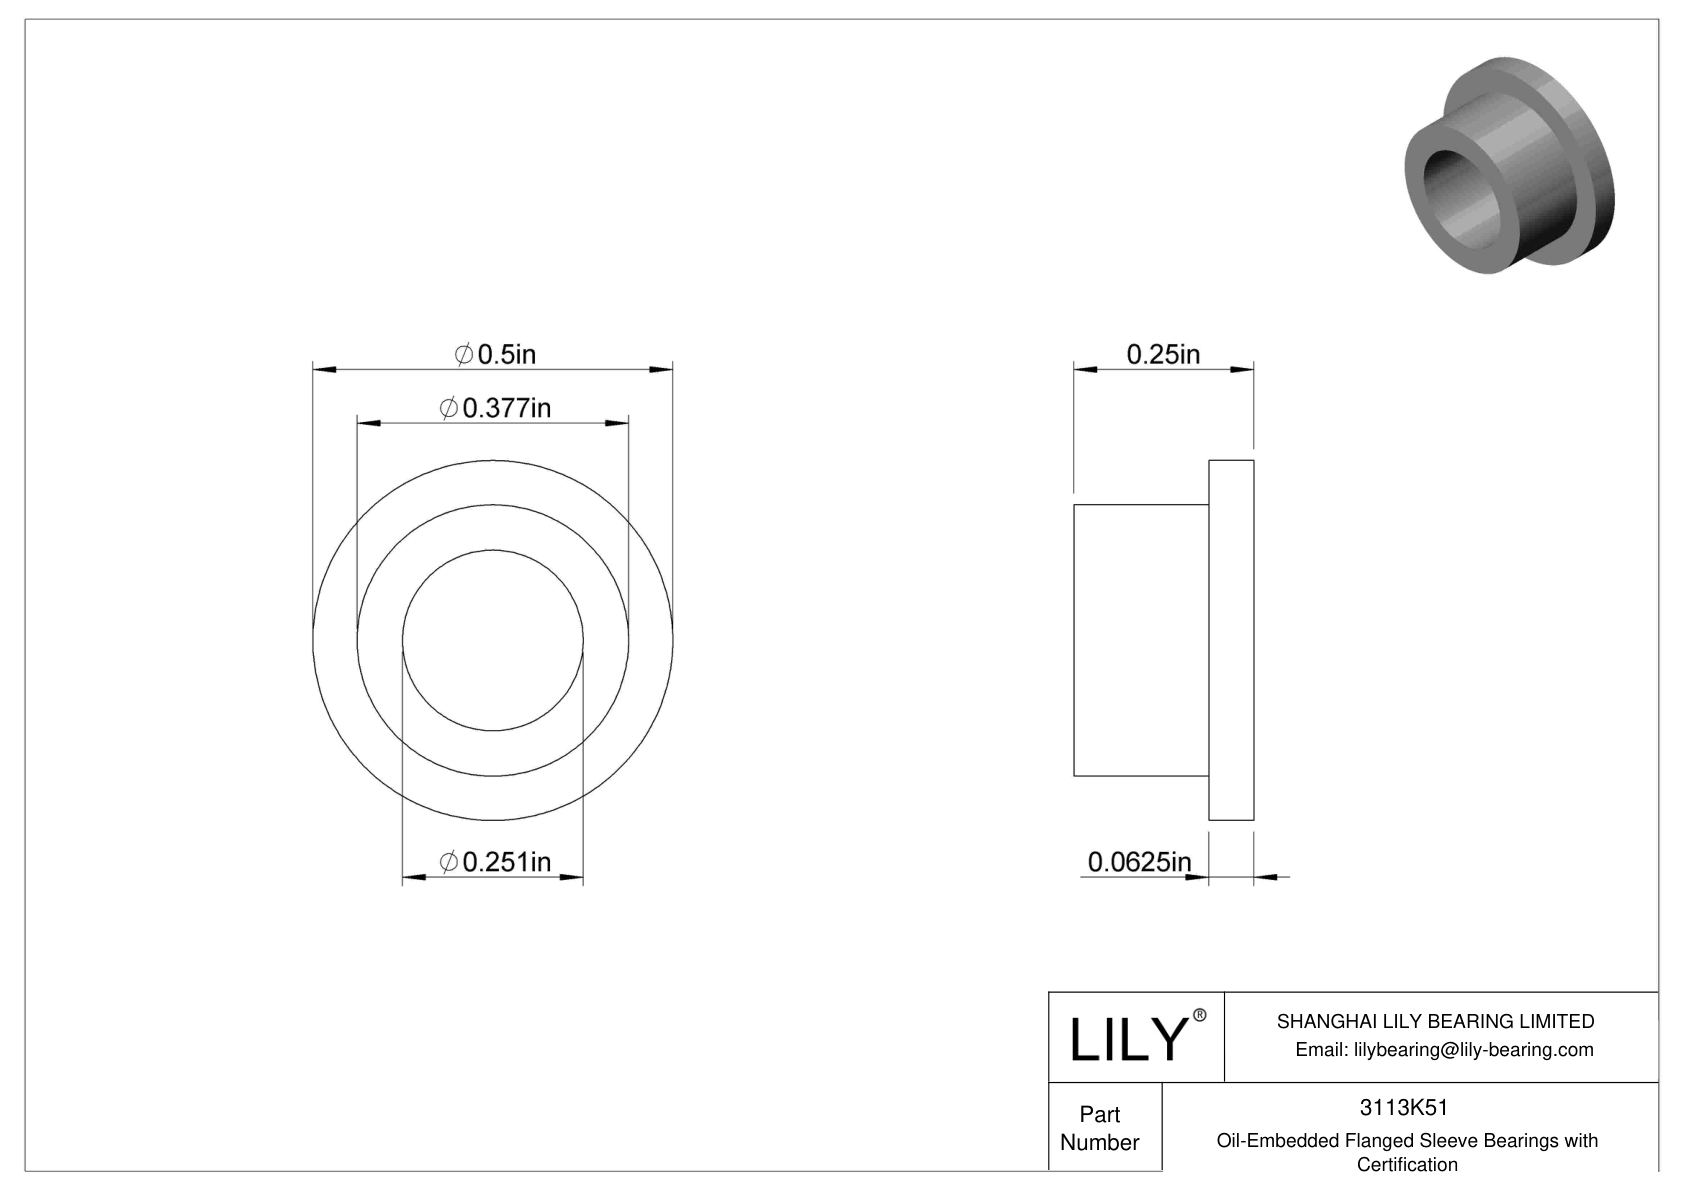 DBBDKFB Oil-Embedded Flanged Sleeve Bearings with Certification cad drawing